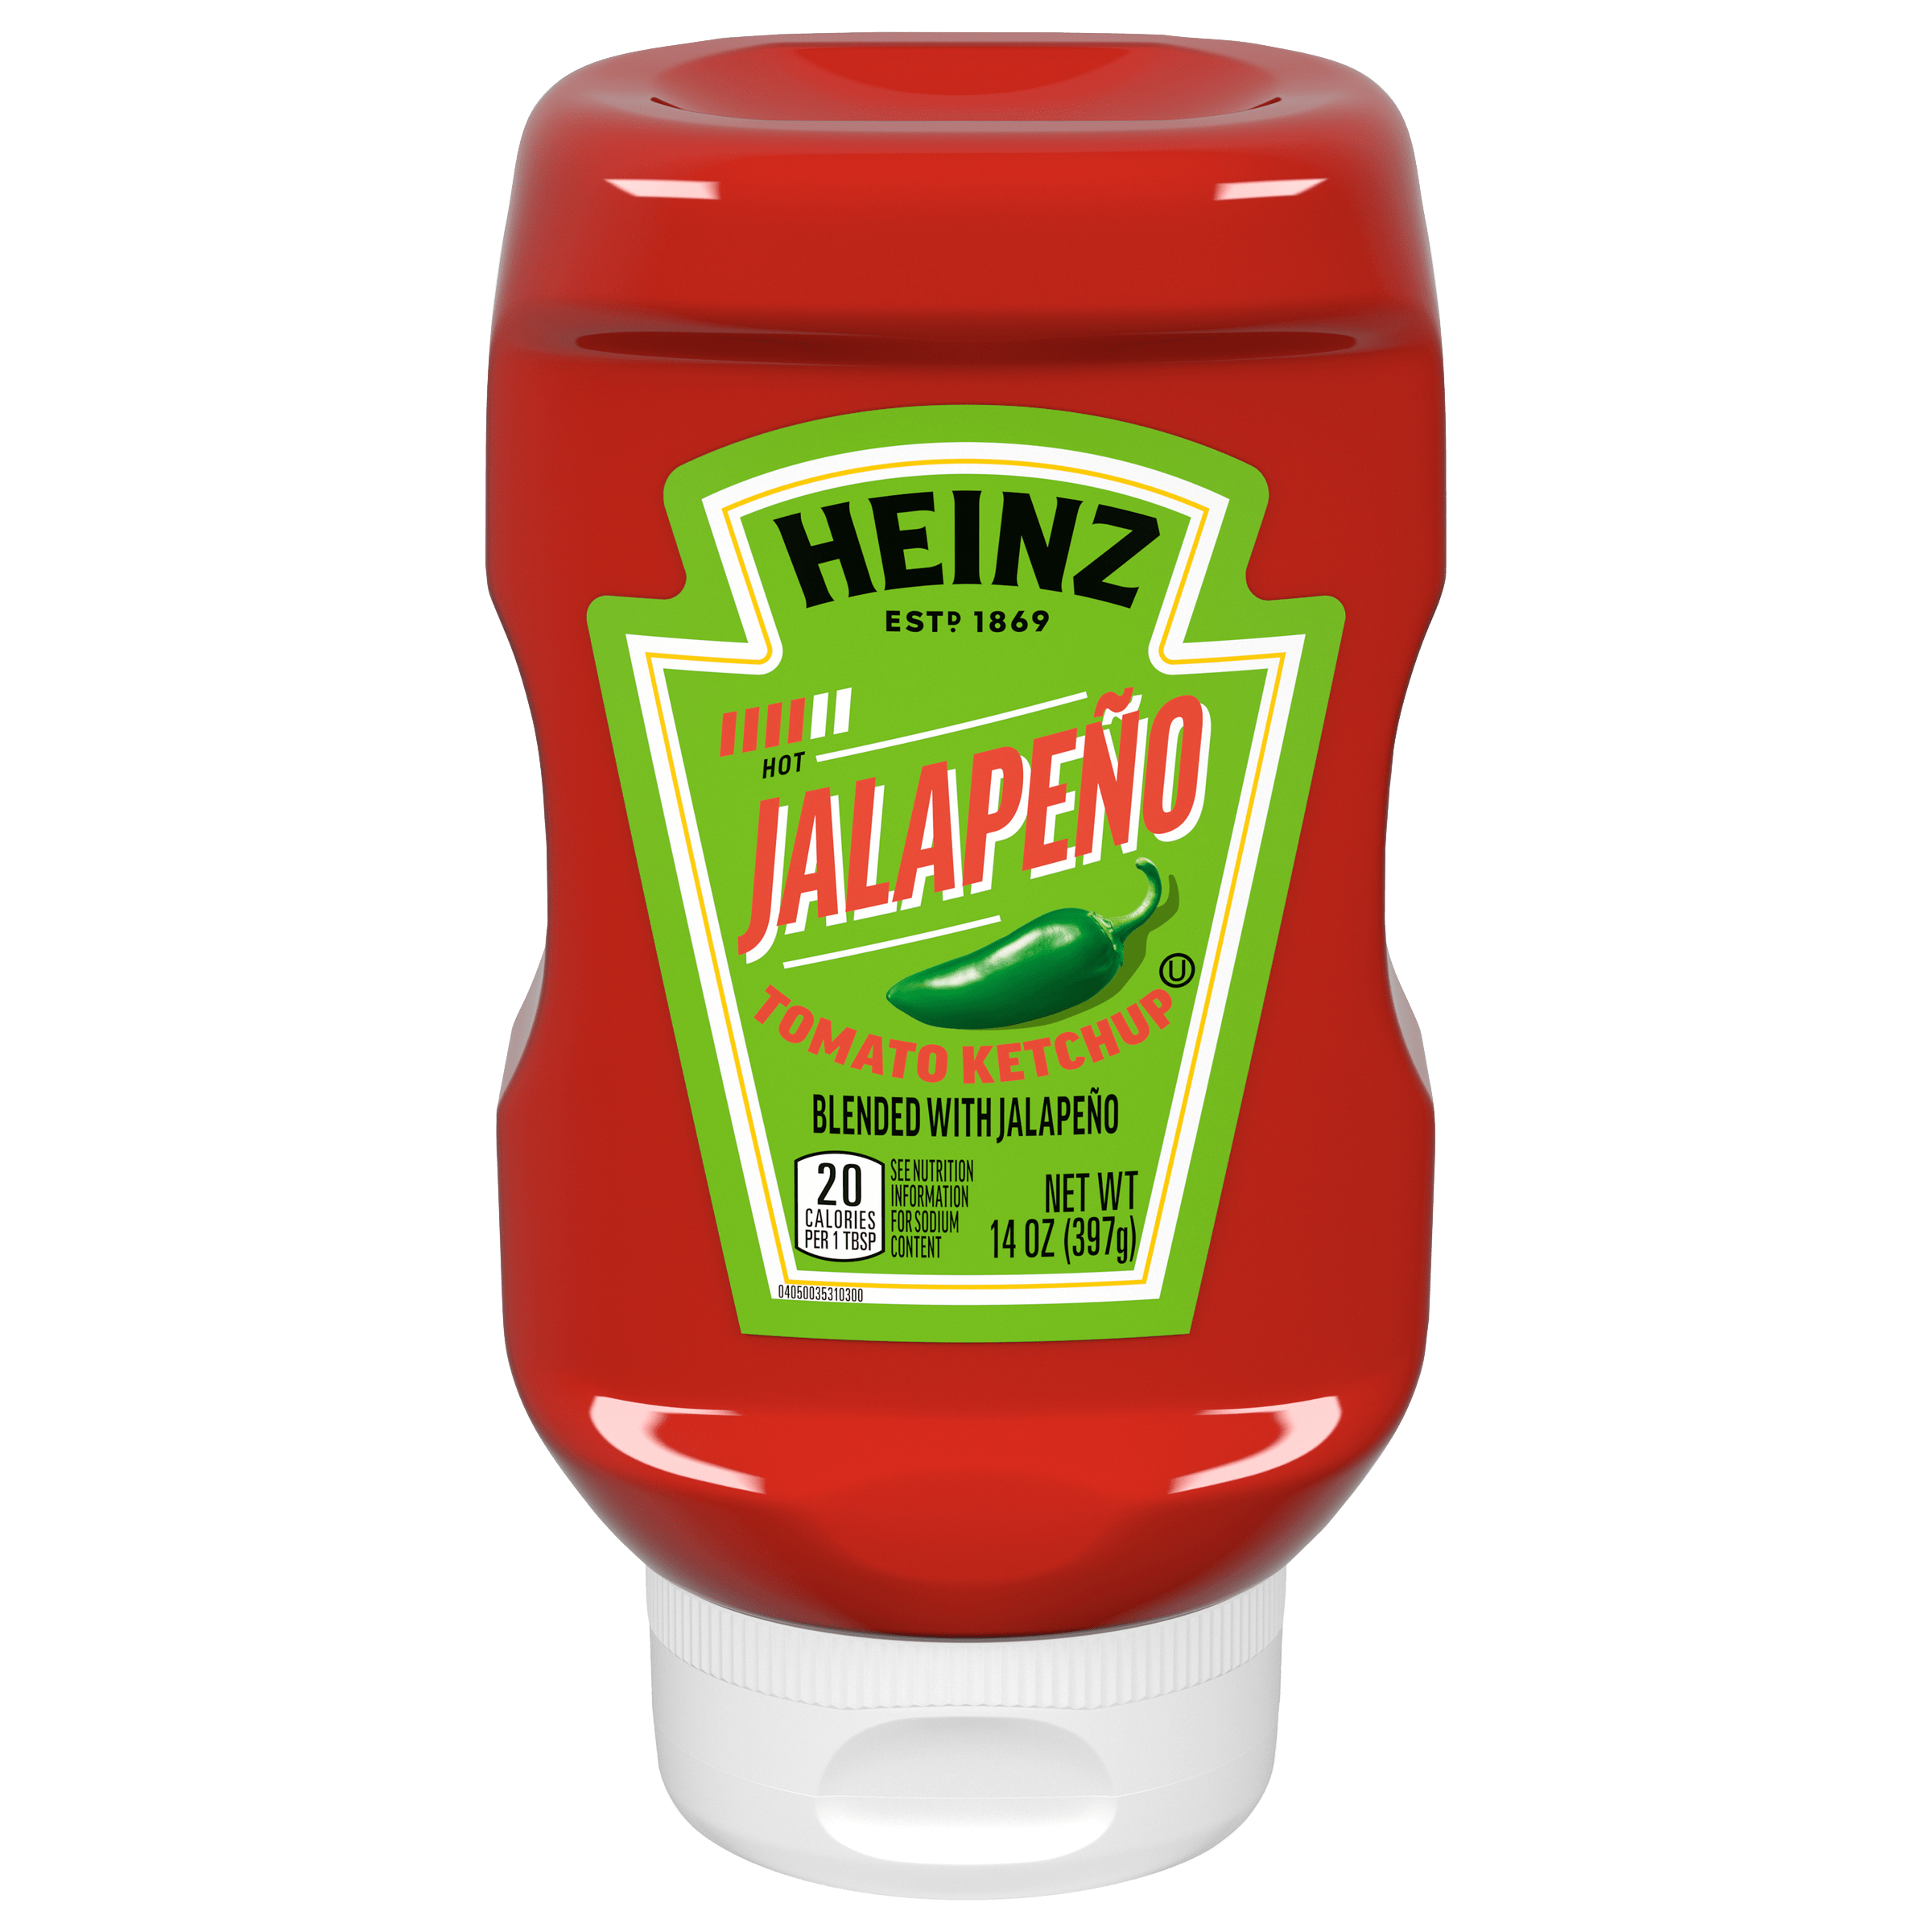 Jalapeno Tomato Ketchup Blended with Jalapeno